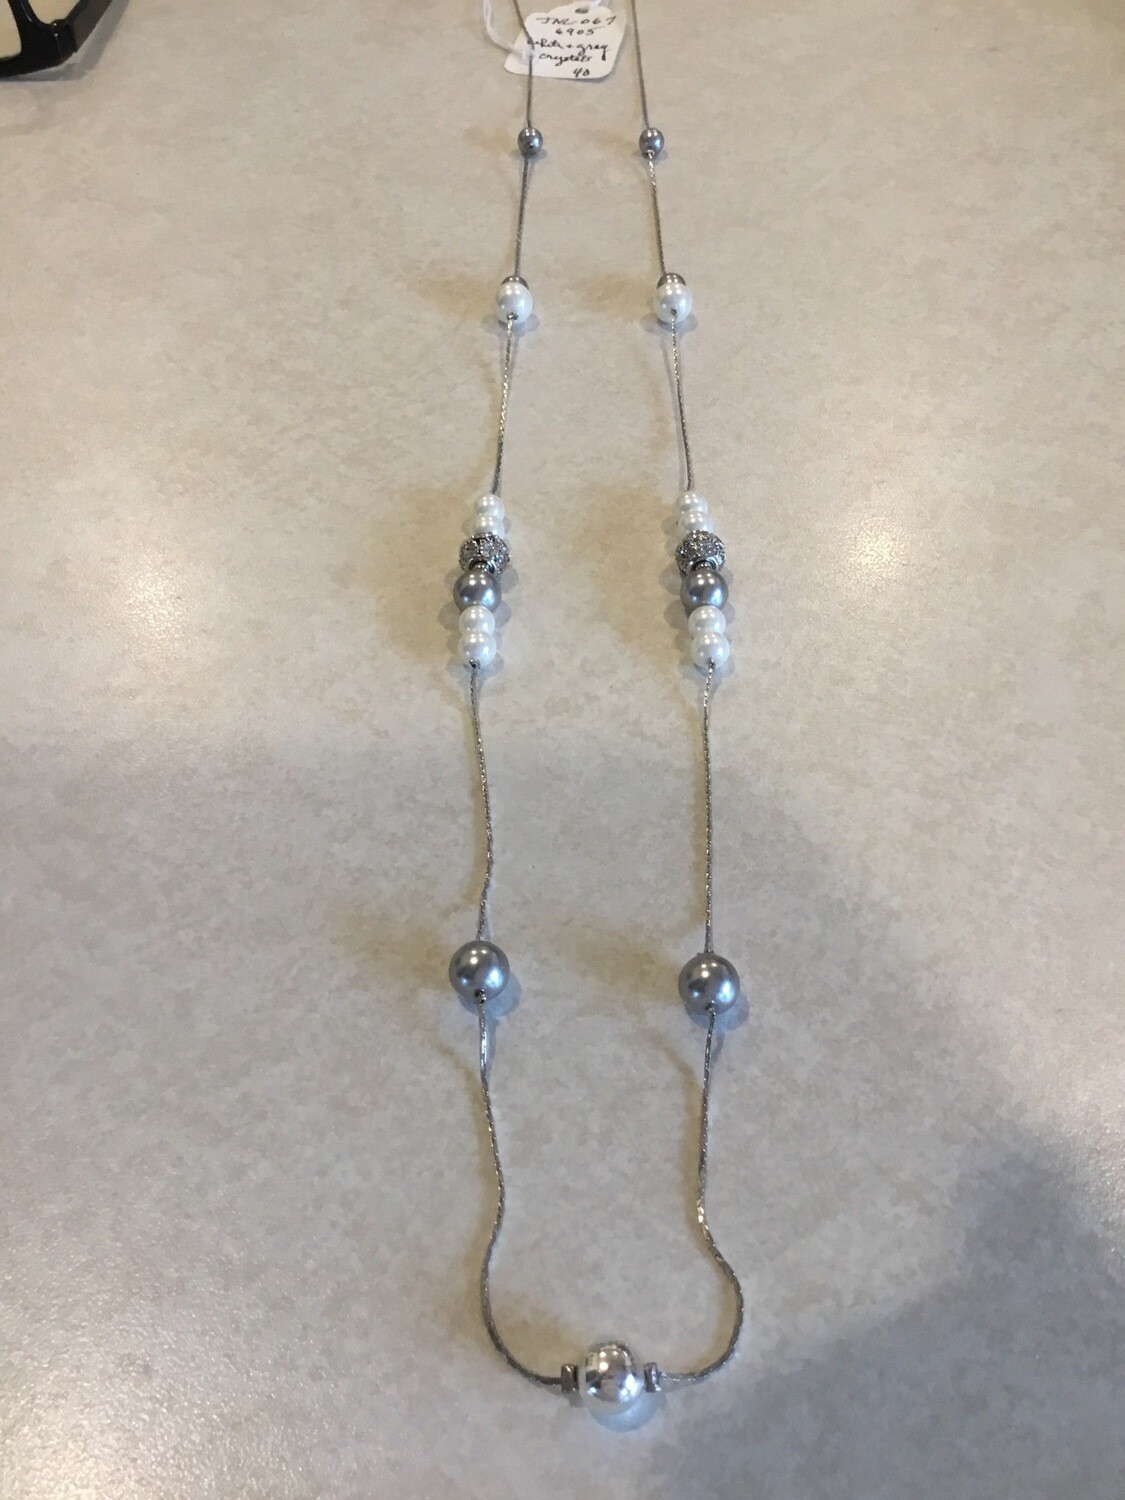 Long Silver Necklace With White, Gray Pearls And Silver Beads